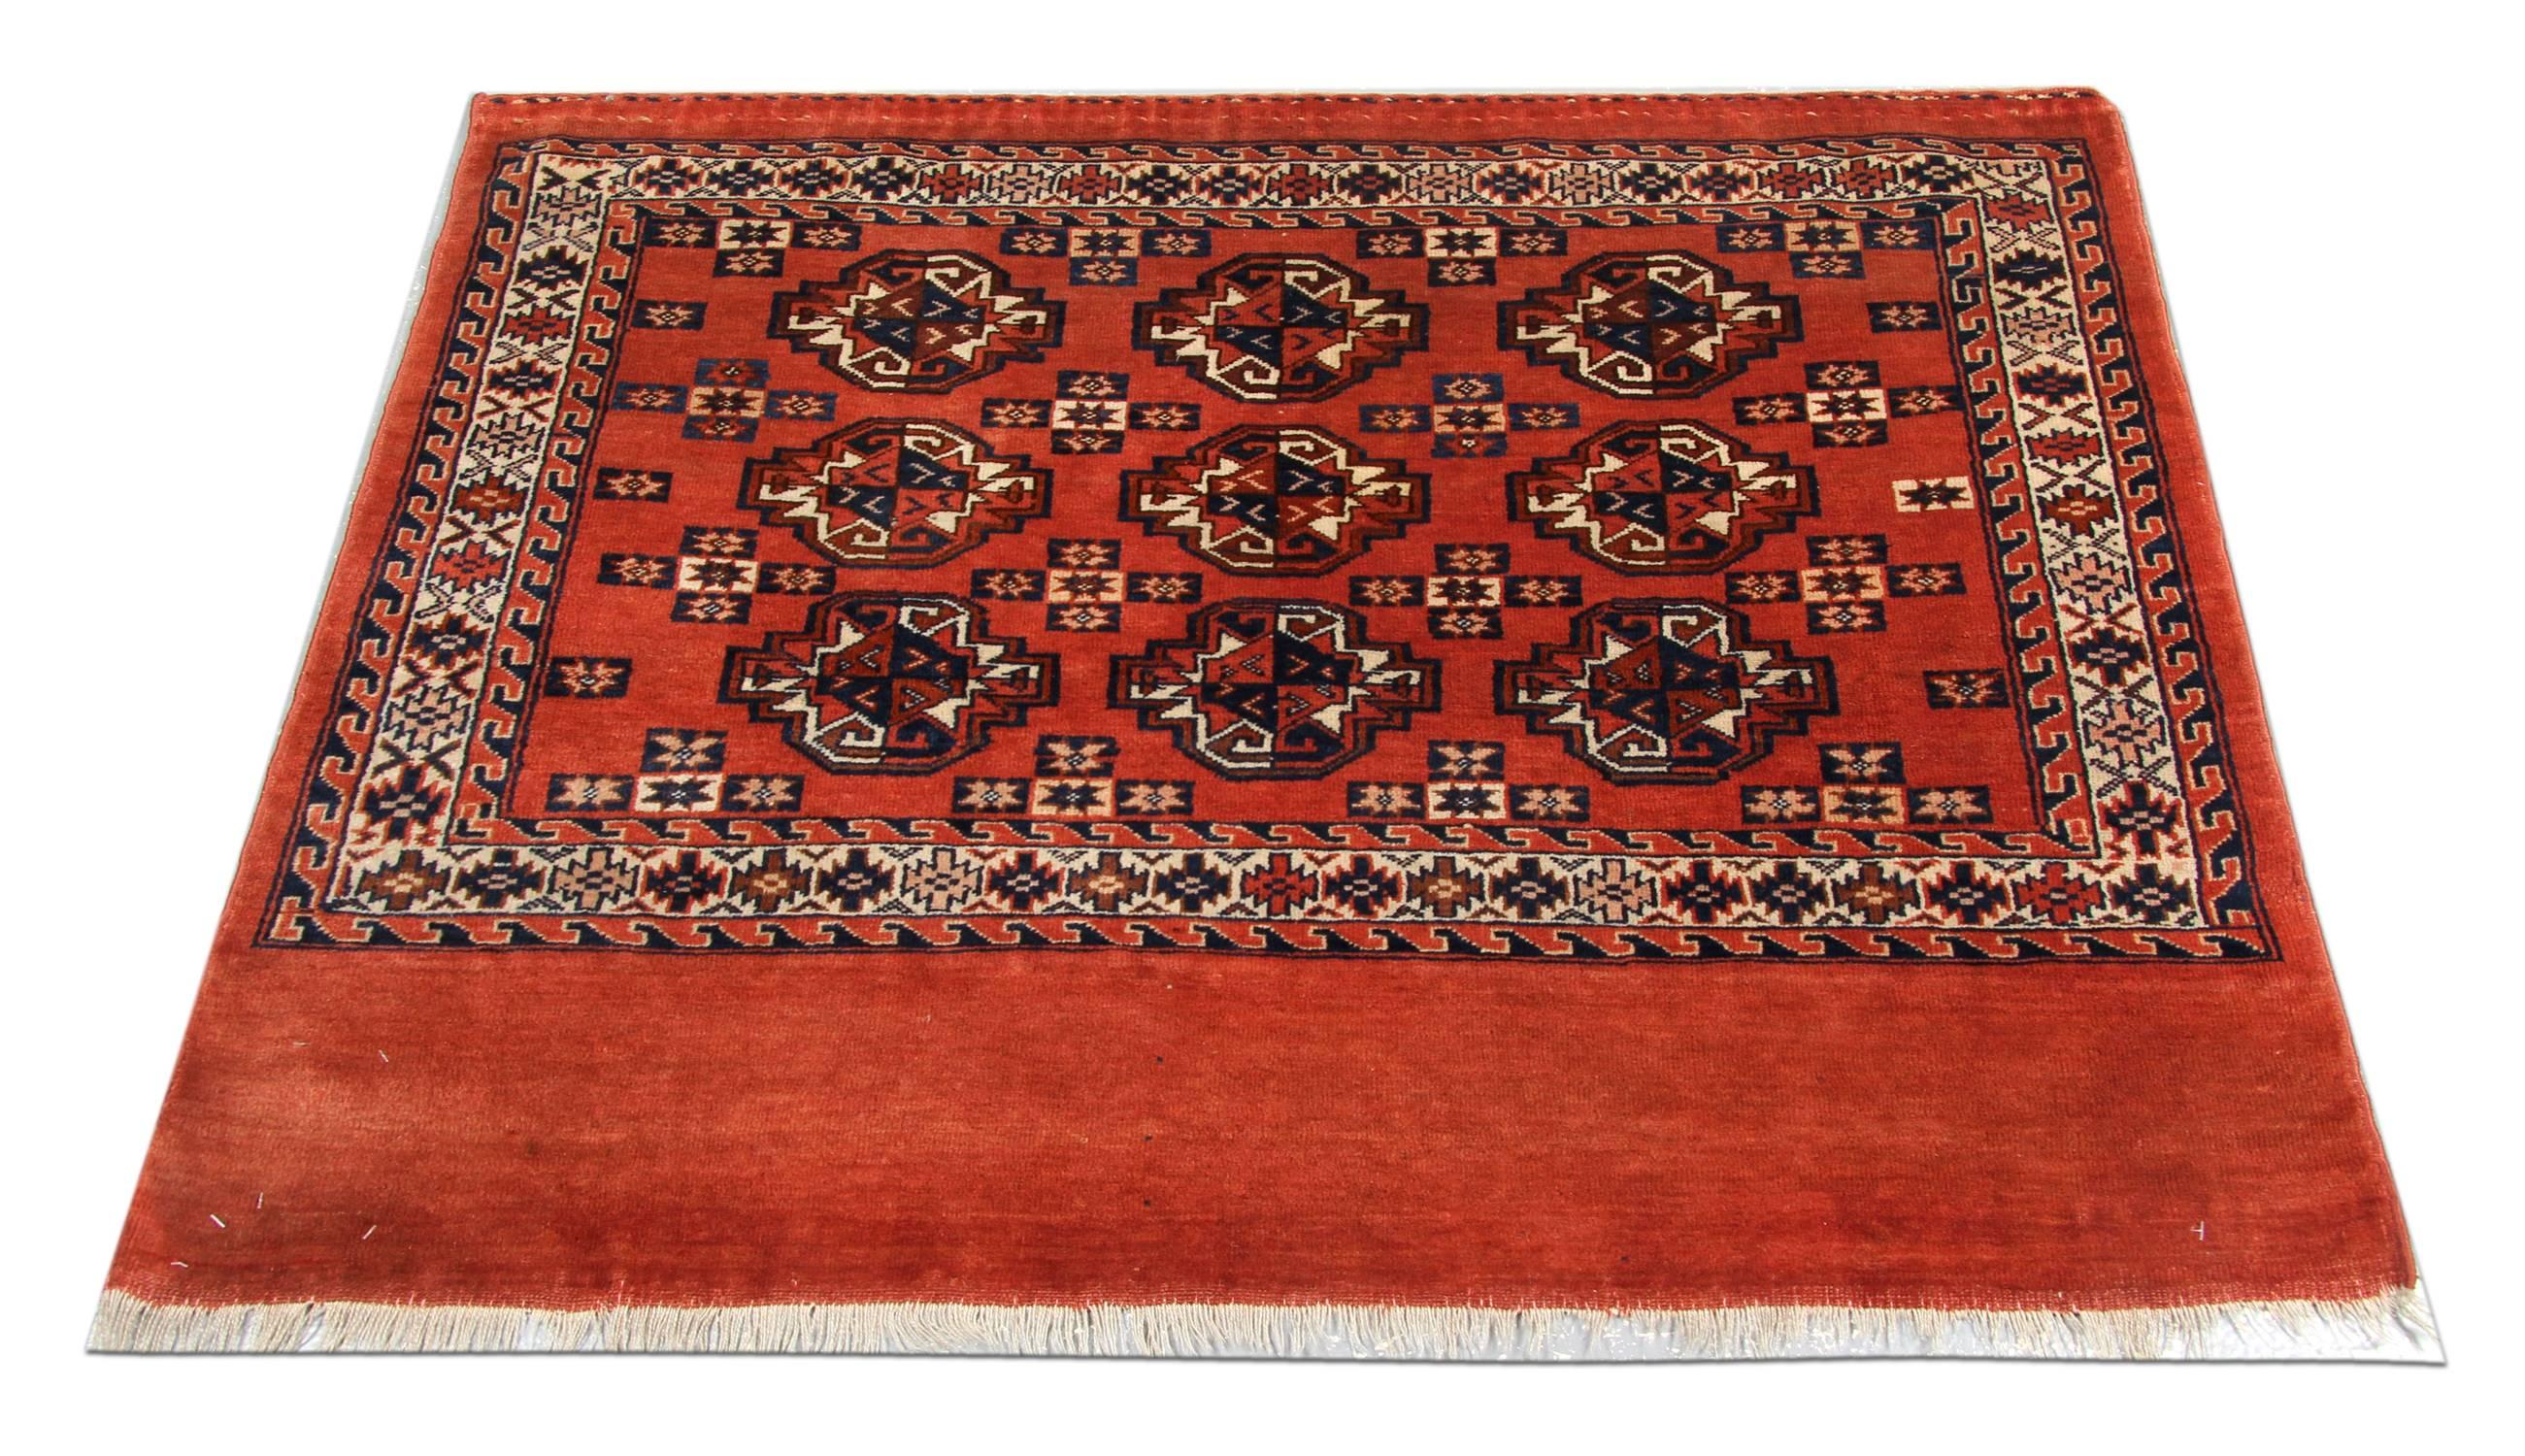 This handmade carpet red rug is a kind of beautiful hand knotted Turkmen carpets with geometric rug pattern and very elegant tribal and geometric rug design. These wool rugs have vibrant natural dyes. The combination of rust red, orange, and gold in